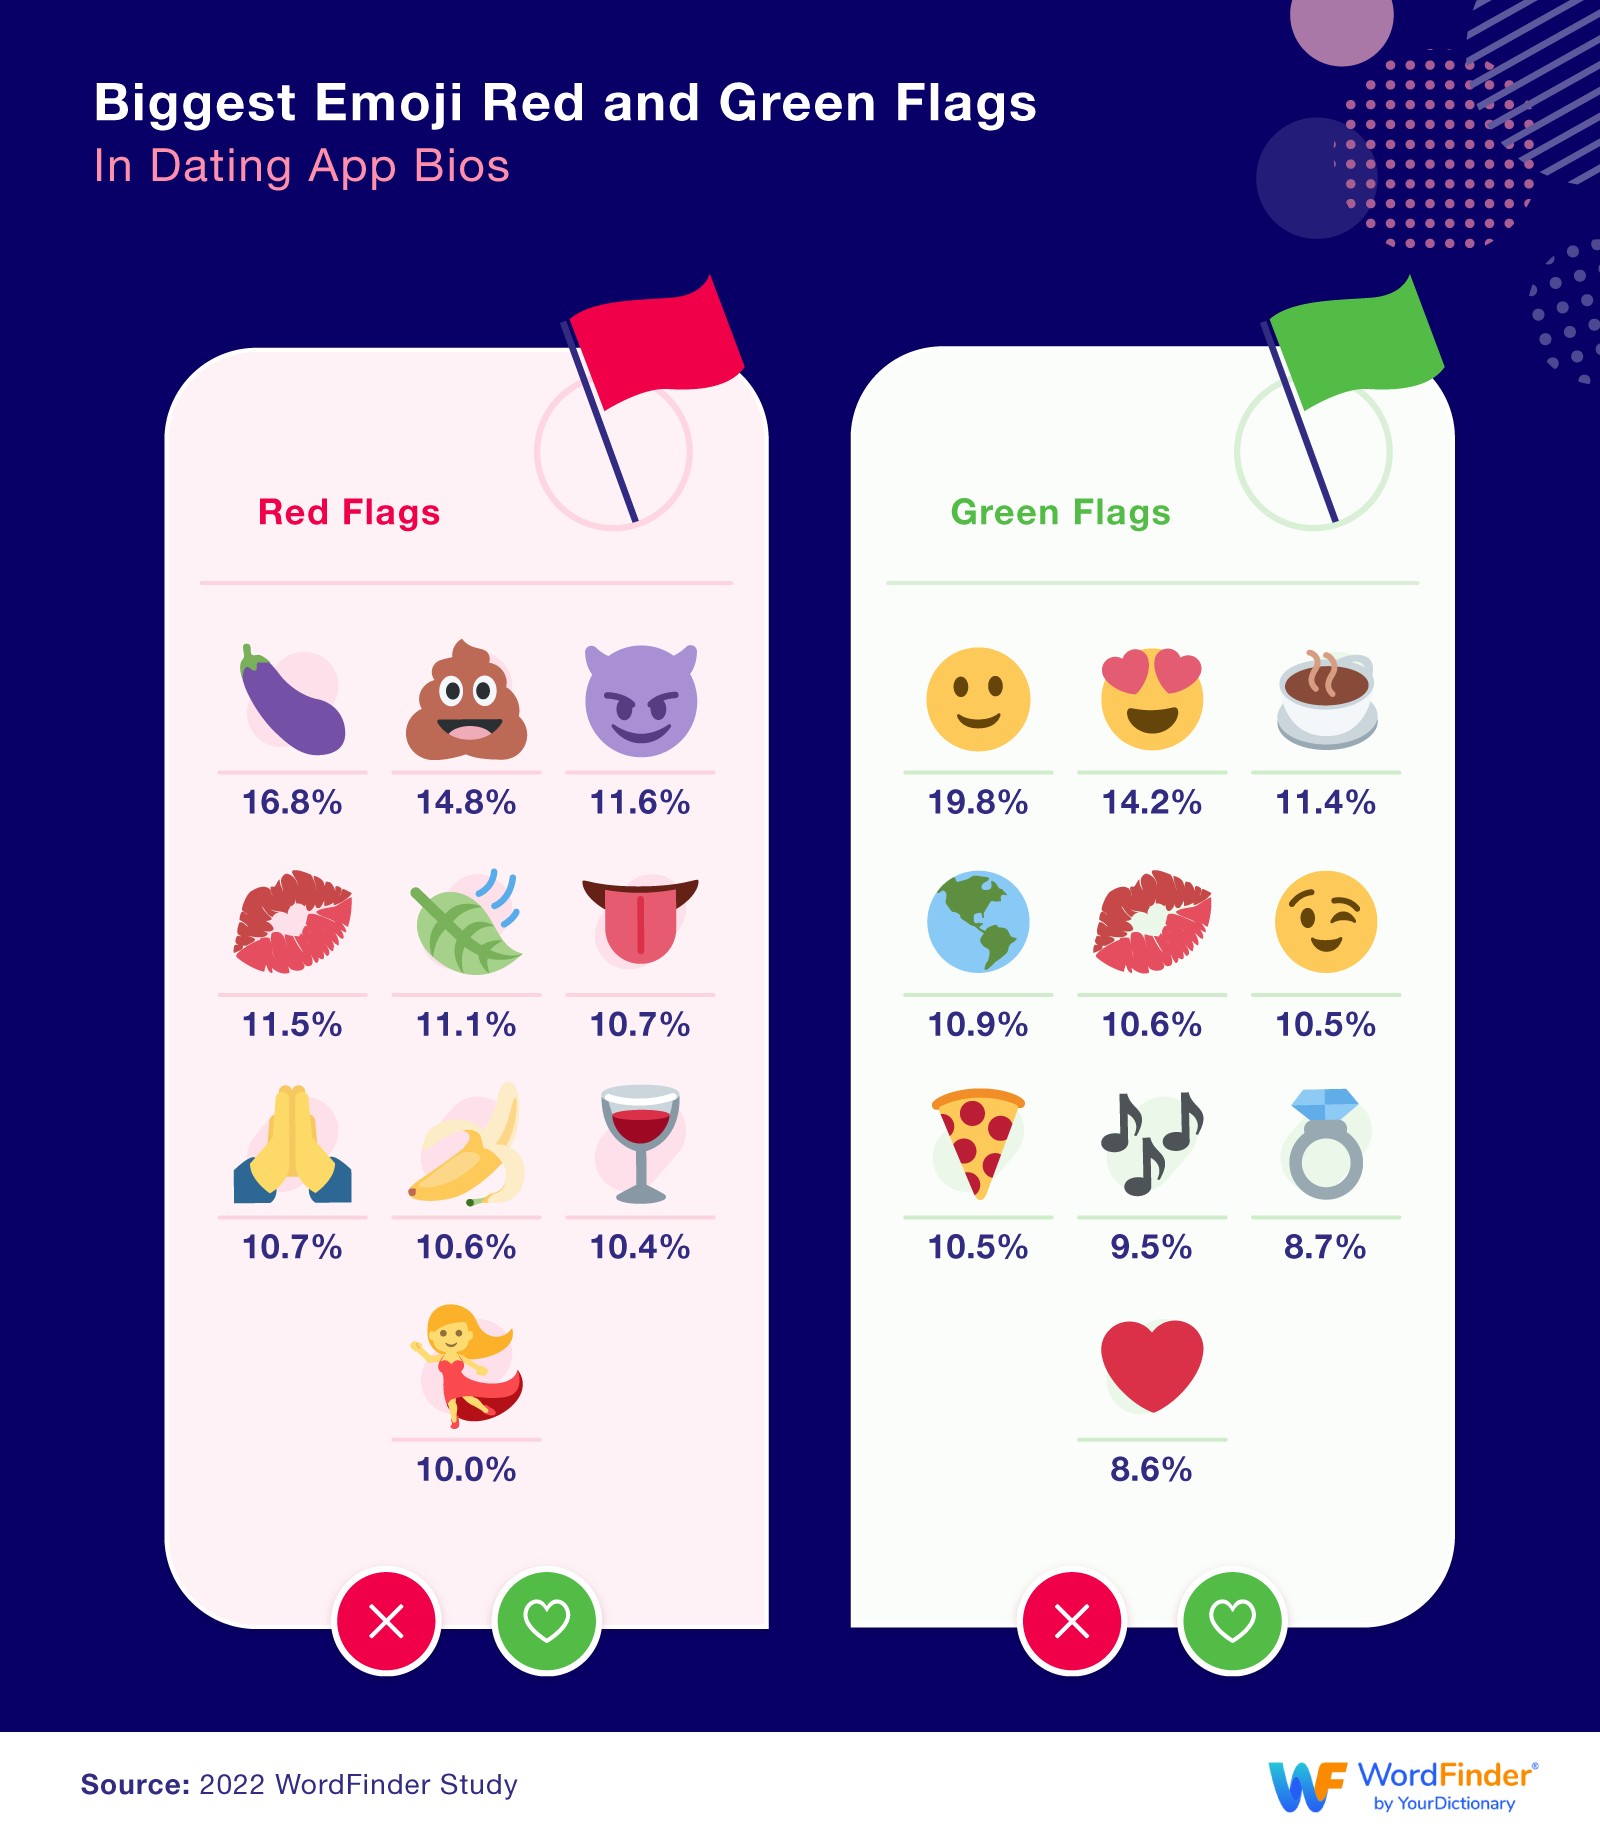 Biggest emoji red and green flags in dating bios